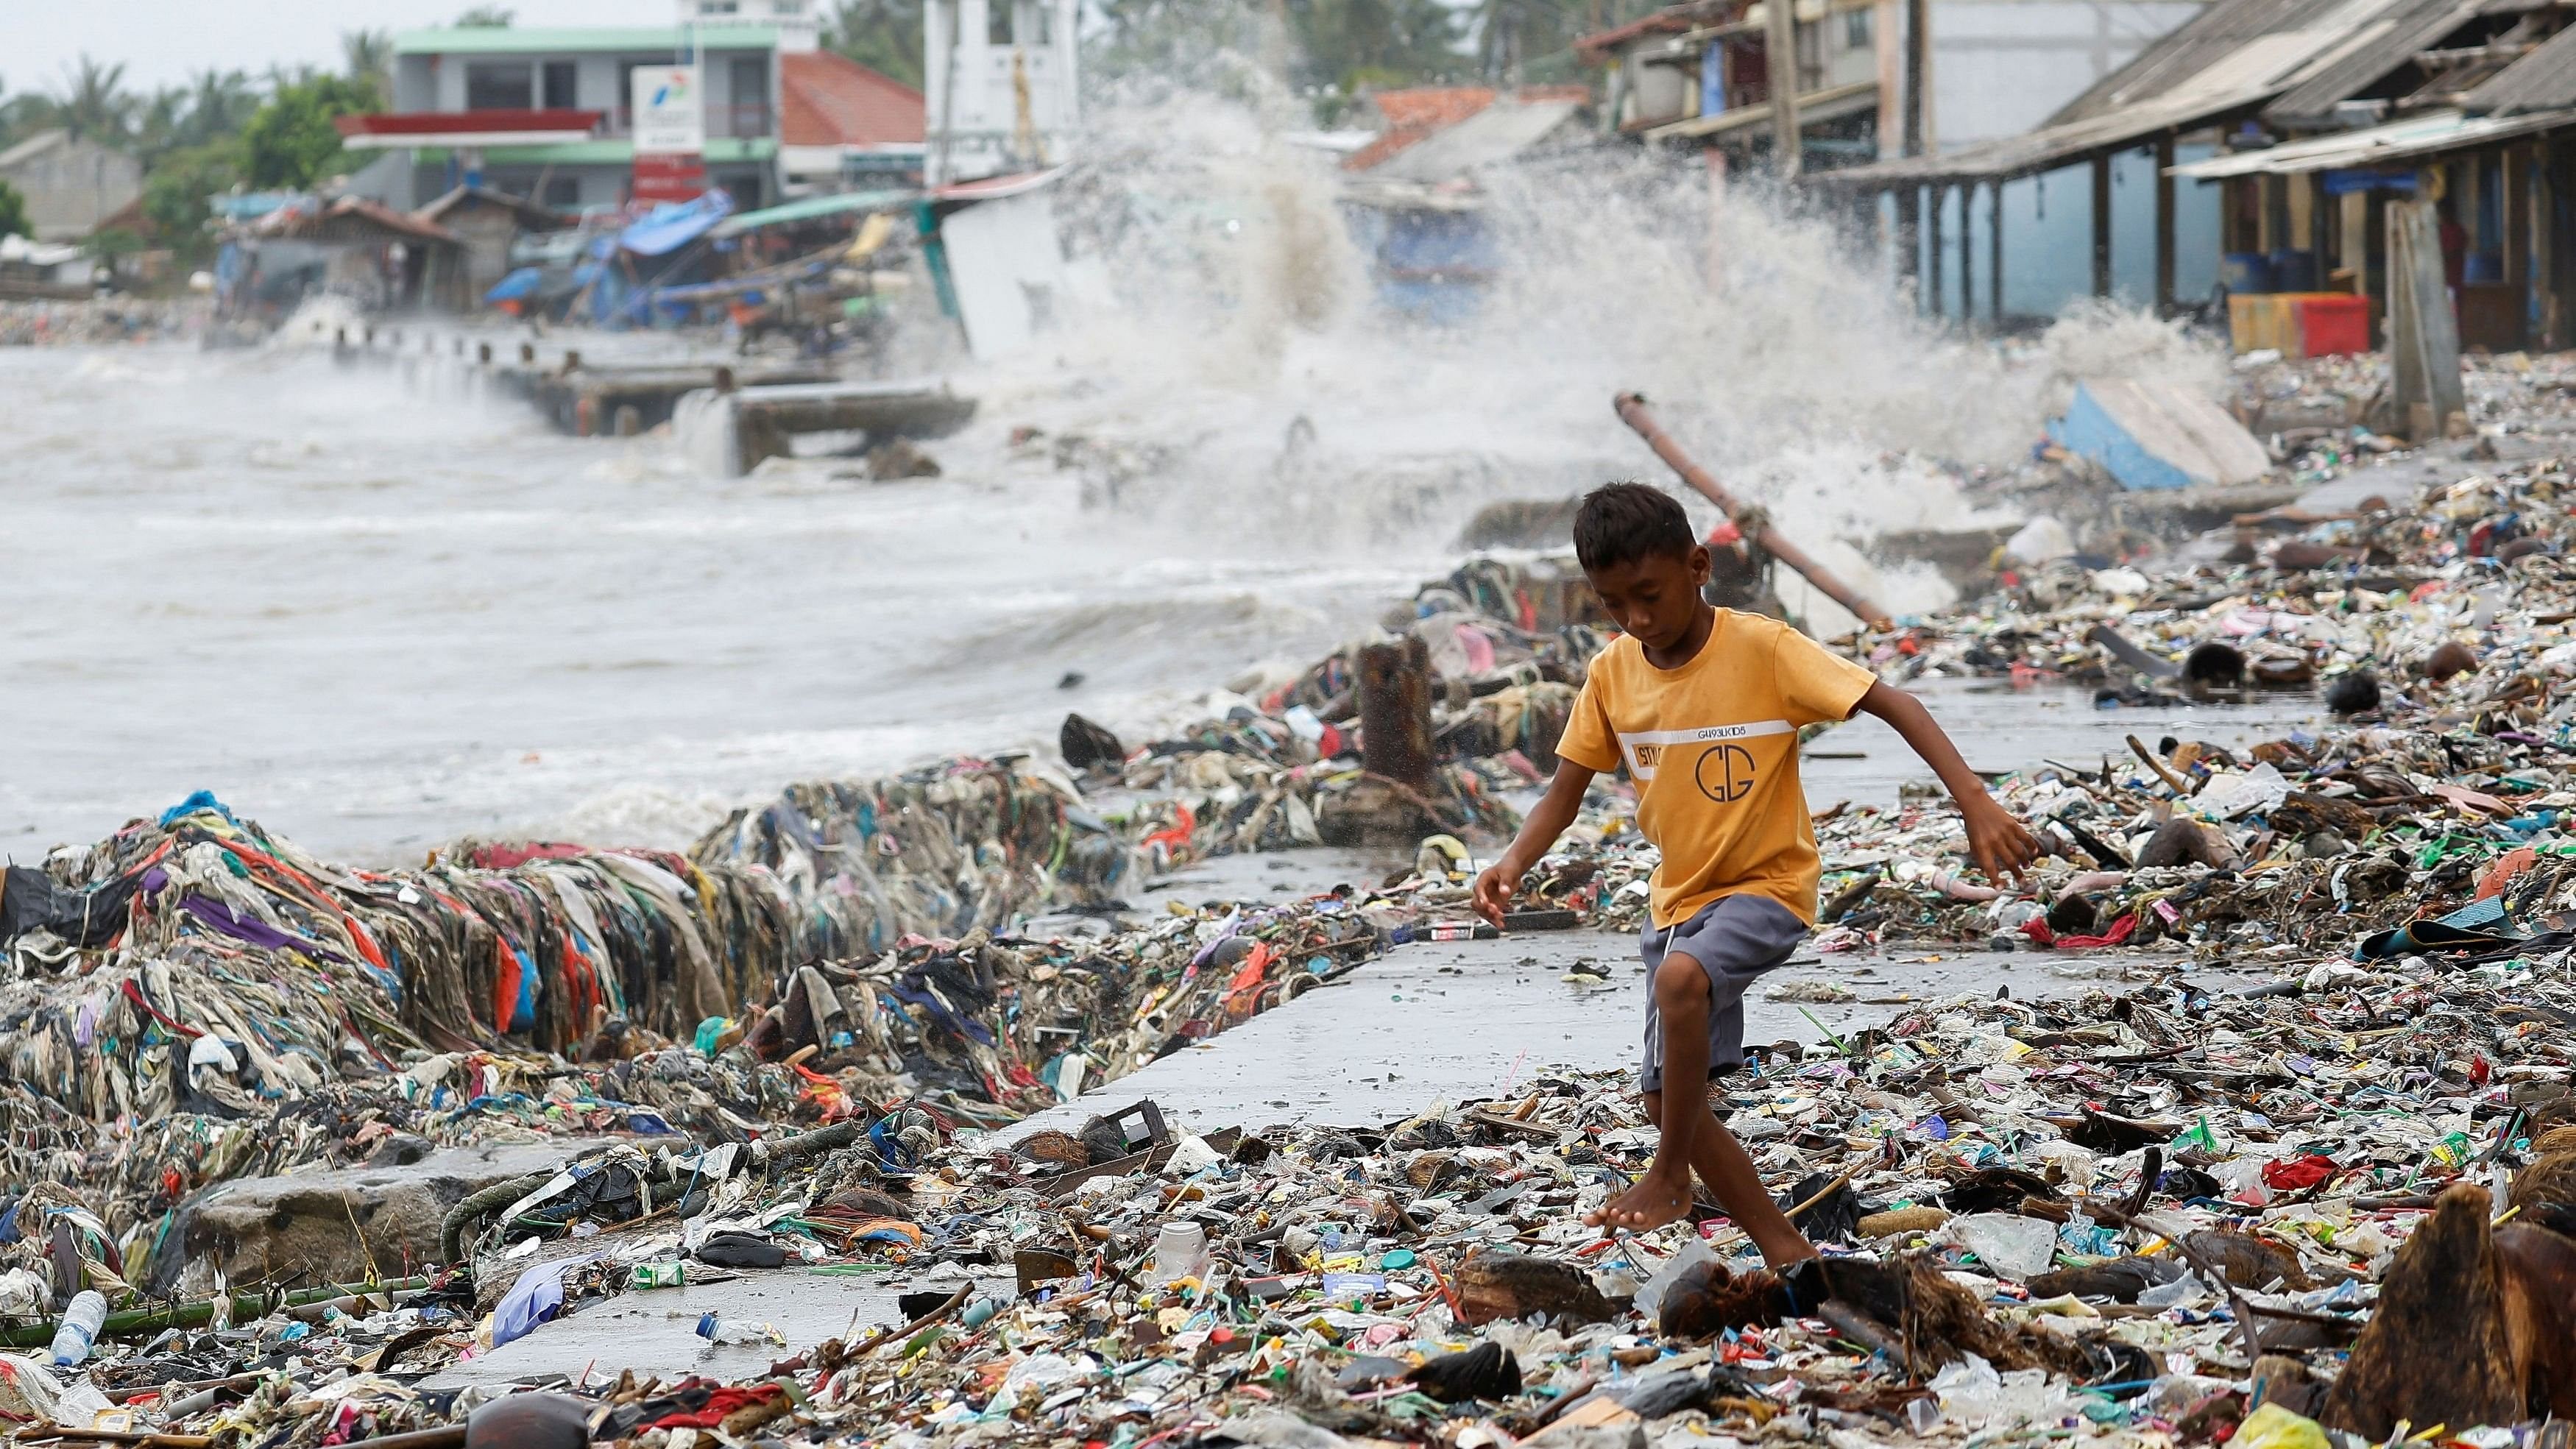 <div class="paragraphs"><p>A boy runs through piles of trash, most of which is plastics and domestic waste, on a beach in Teluk fishing village.</p></div>